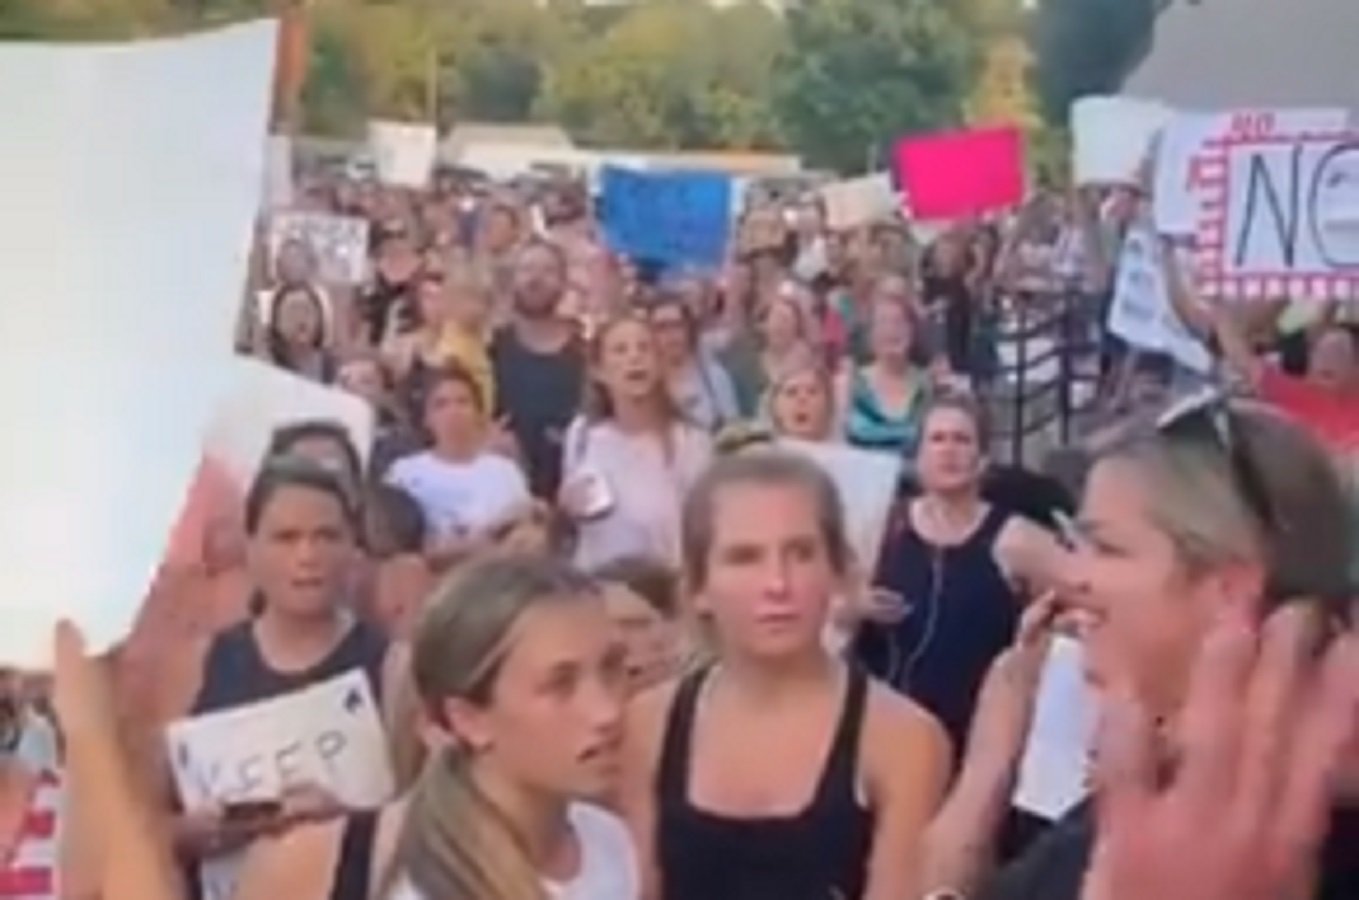  WATCH: MASSIVE CROWD Gathers at Tennessee School Board Meeting Chanting ‘No More Masks’